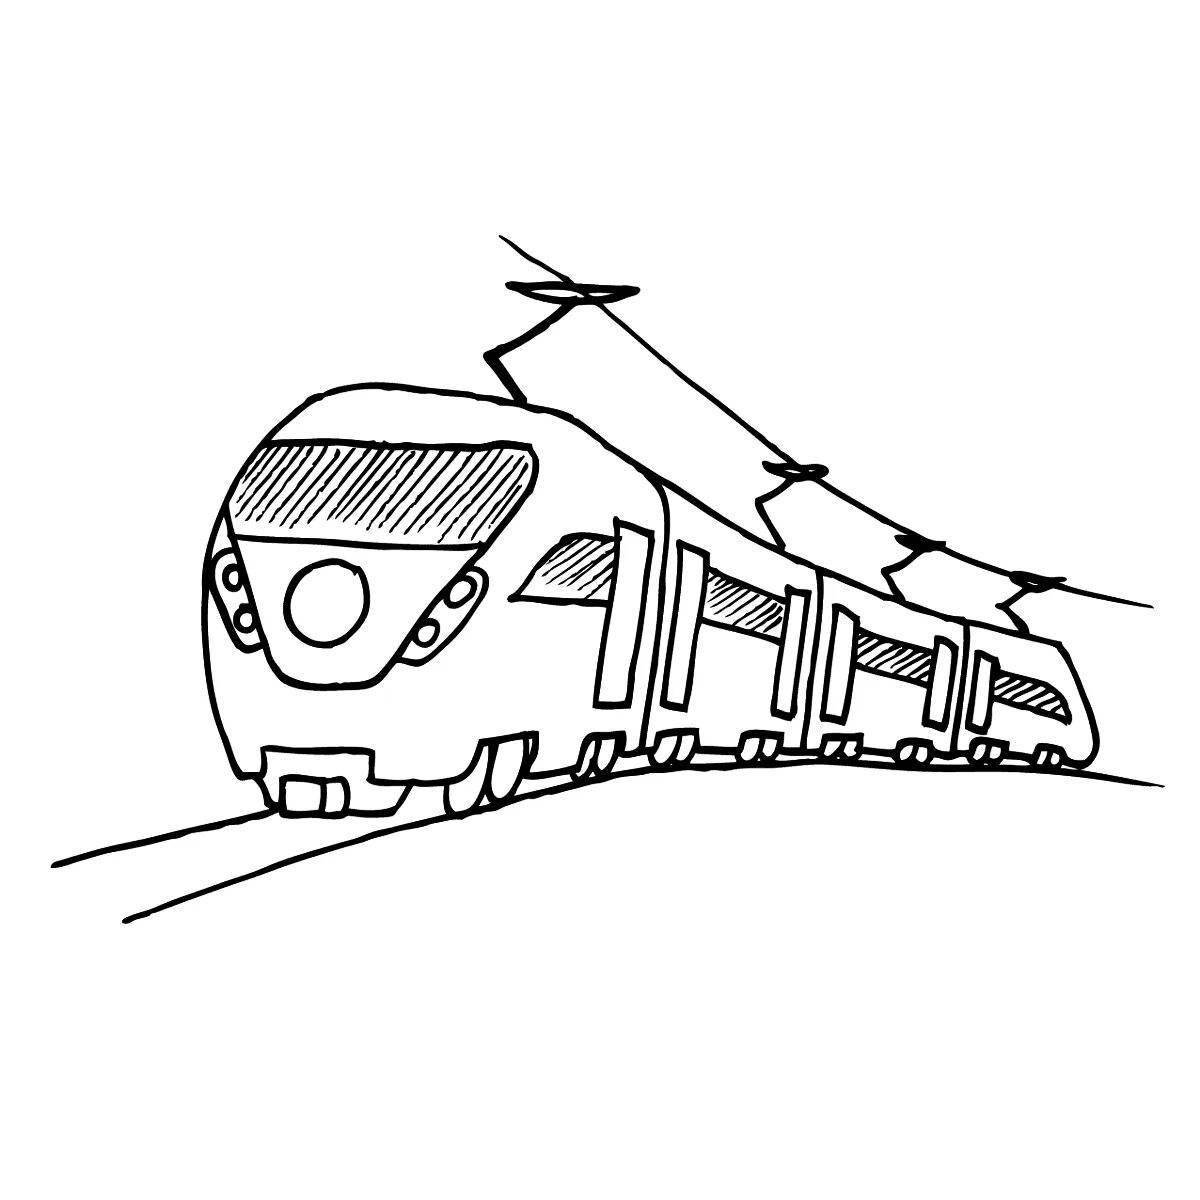 Ethereal ghost train coloring page